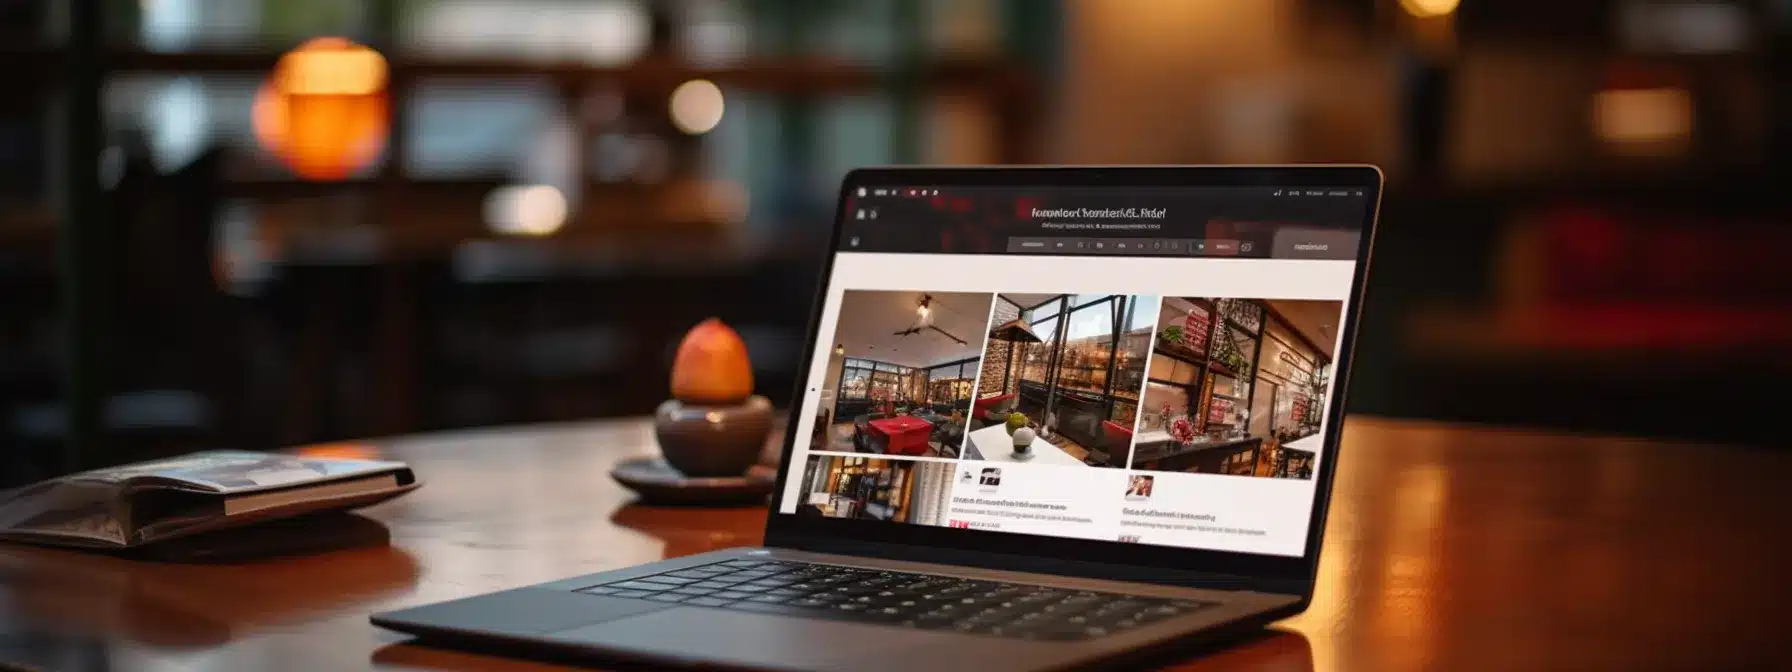 A Laptop Displaying A Website With A Sleek And Innovative Design, Highlighting The Key Elements Of Effective Online Branding, Surrounded By Creative Branding Materials And Strategies.